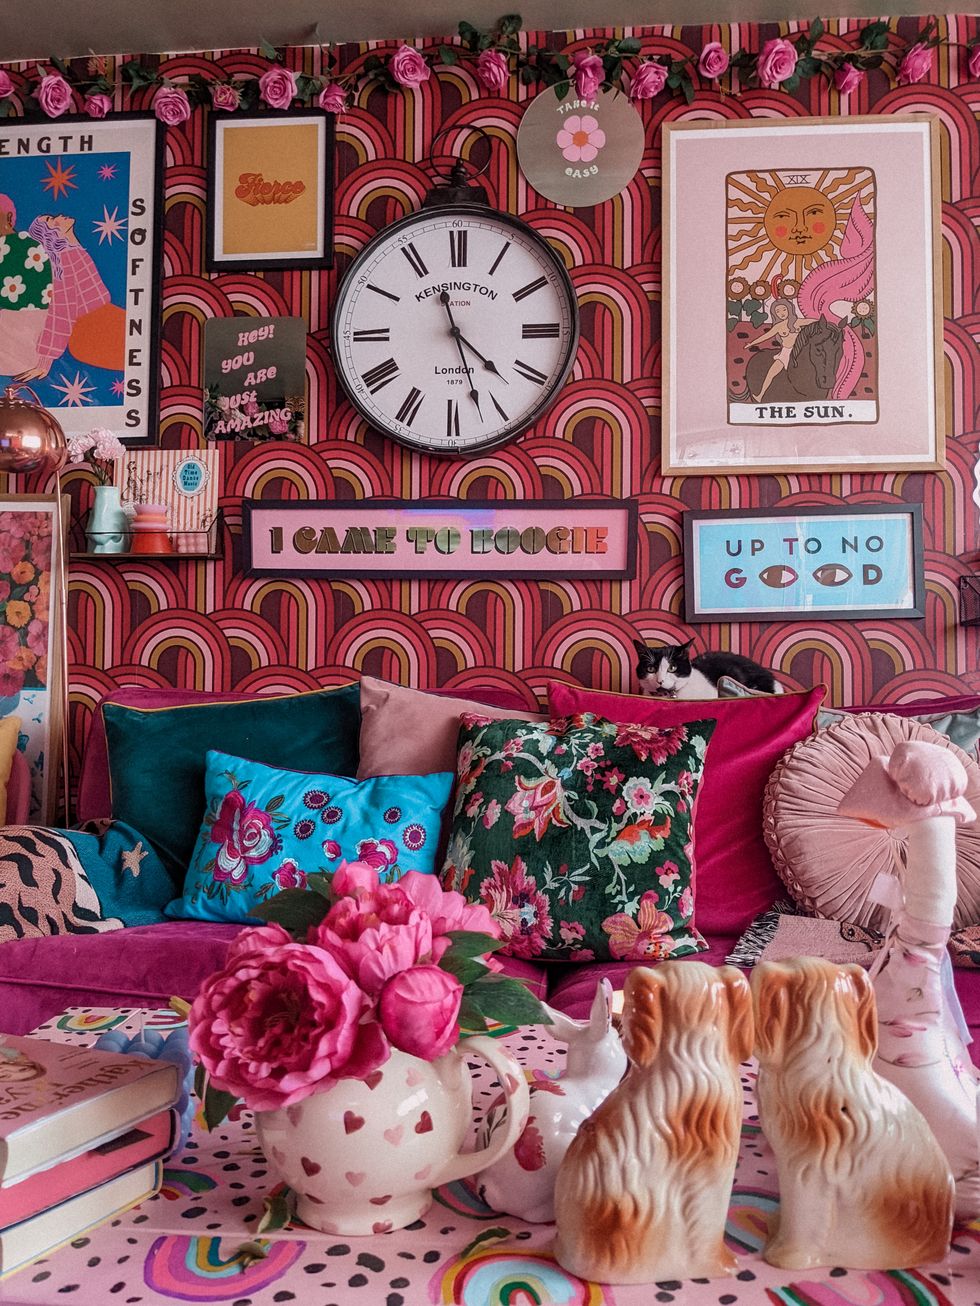 These 21 Home Decor Tips Will Instantly Uplift Your Home's Interiors!